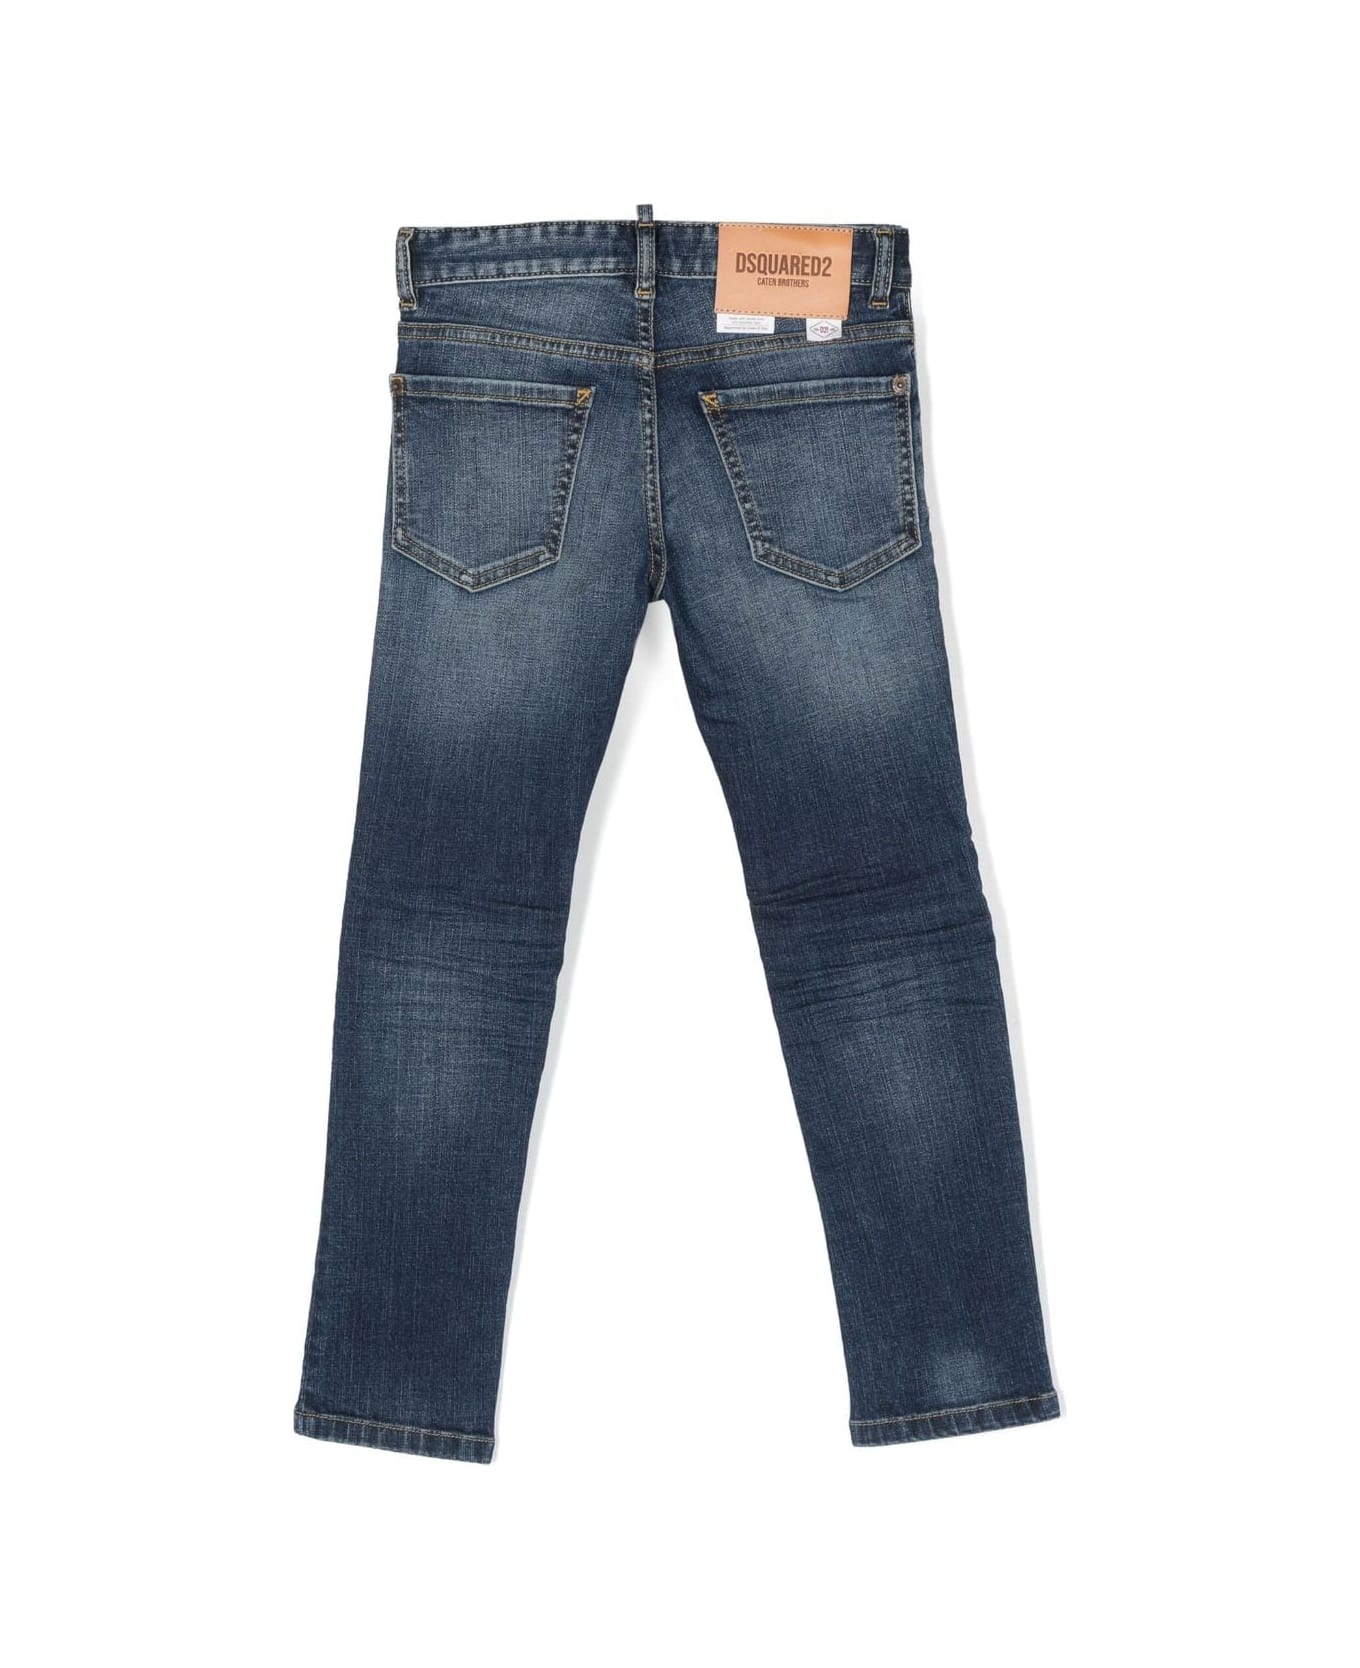 Dsquared2 D2p31lvm Cool Guy Jean - Blue ボトムス